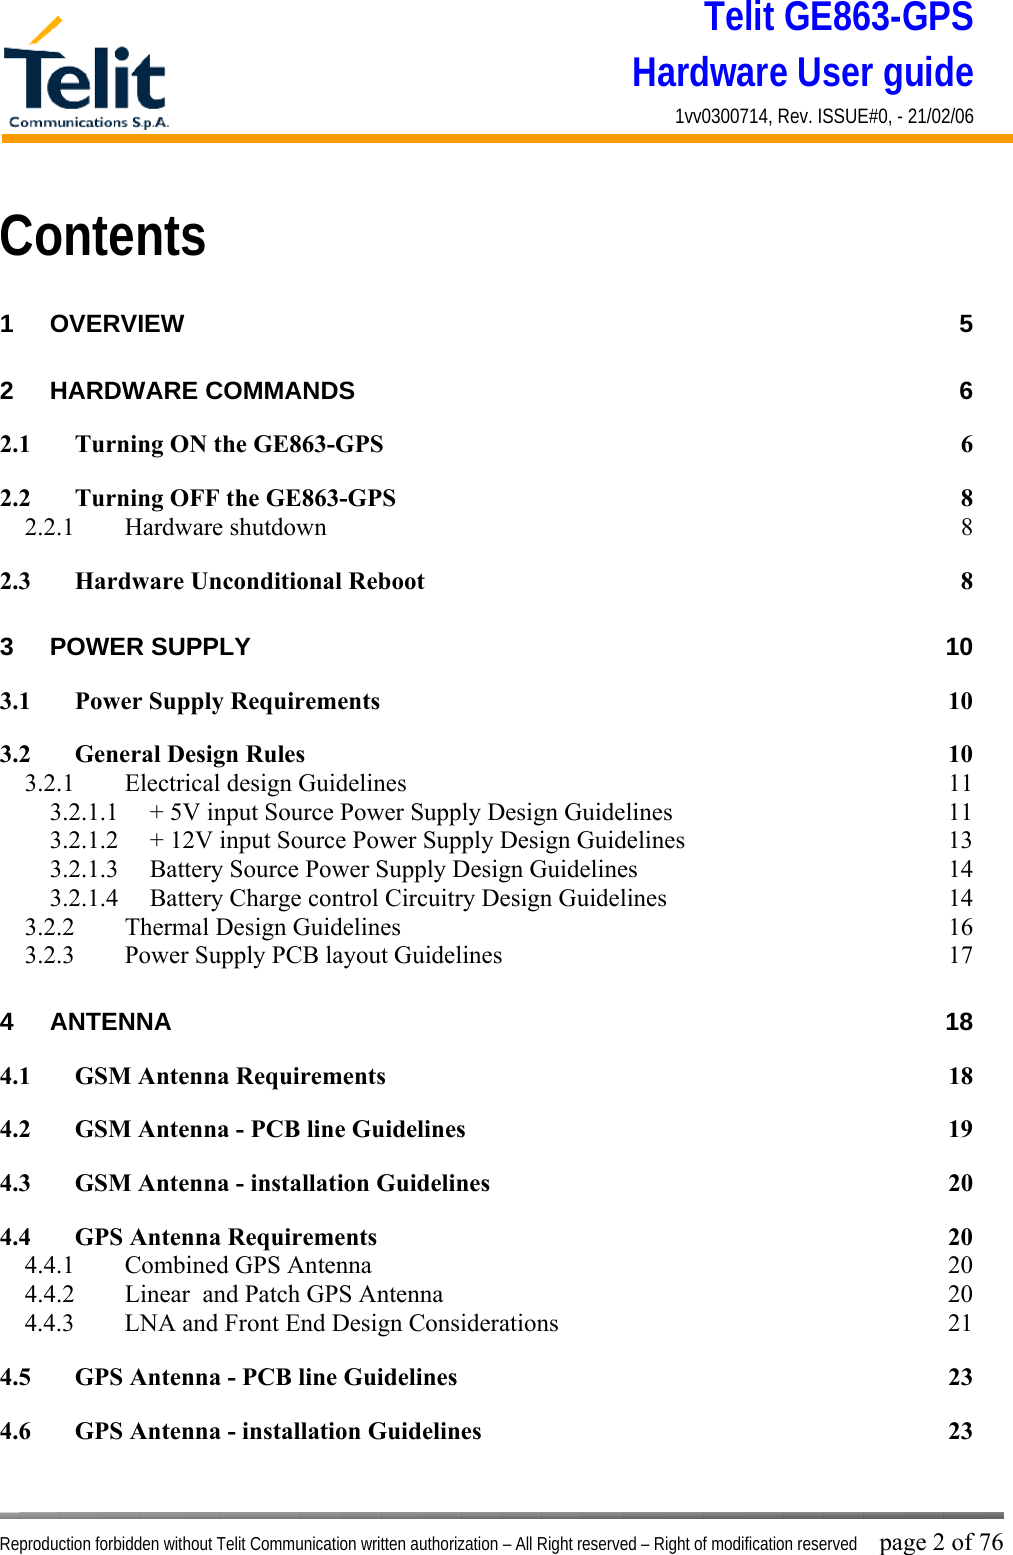 Telit GE863-GPS Hardware User guide 1vv0300714, Rev. ISSUE#0, - 21/02/06    Reproduction forbidden without Telit Communication written authorization – All Right reserved – Right of modification reserved page 2 of 76 Contents 1 OVERVIEW 5 2 HARDWARE COMMANDS  6 2.1 Turning ON the GE863-GPS  6 2.2 Turning OFF the GE863-GPS  8 2.2.1 Hardware shutdown  8 2.3 Hardware Unconditional Reboot  8 3 POWER SUPPLY  10 3.1 Power Supply Requirements  10 3.2 General Design Rules  10 3.2.1  Electrical design Guidelines  11 3.2.1.1  + 5V input Source Power Supply Design Guidelines  11 3.2.1.2  + 12V input Source Power Supply Design Guidelines  13 3.2.1.3  Battery Source Power Supply Design Guidelines  14 3.2.1.4  Battery Charge control Circuitry Design Guidelines  14 3.2.2  Thermal Design Guidelines  16 3.2.3  Power Supply PCB layout Guidelines  17 4 ANTENNA 18 4.1 GSM Antenna Requirements  18 4.2 GSM Antenna - PCB line Guidelines  19 4.3 GSM Antenna - installation Guidelines  20 4.4 GPS Antenna Requirements  20 4.4.1  Combined GPS Antenna  20 4.4.2  Linear  and Patch GPS Antenna  20 4.4.3  LNA and Front End Design Considerations  21 4.5 GPS Antenna - PCB line Guidelines  23 4.6 GPS Antenna - installation Guidelines  23 